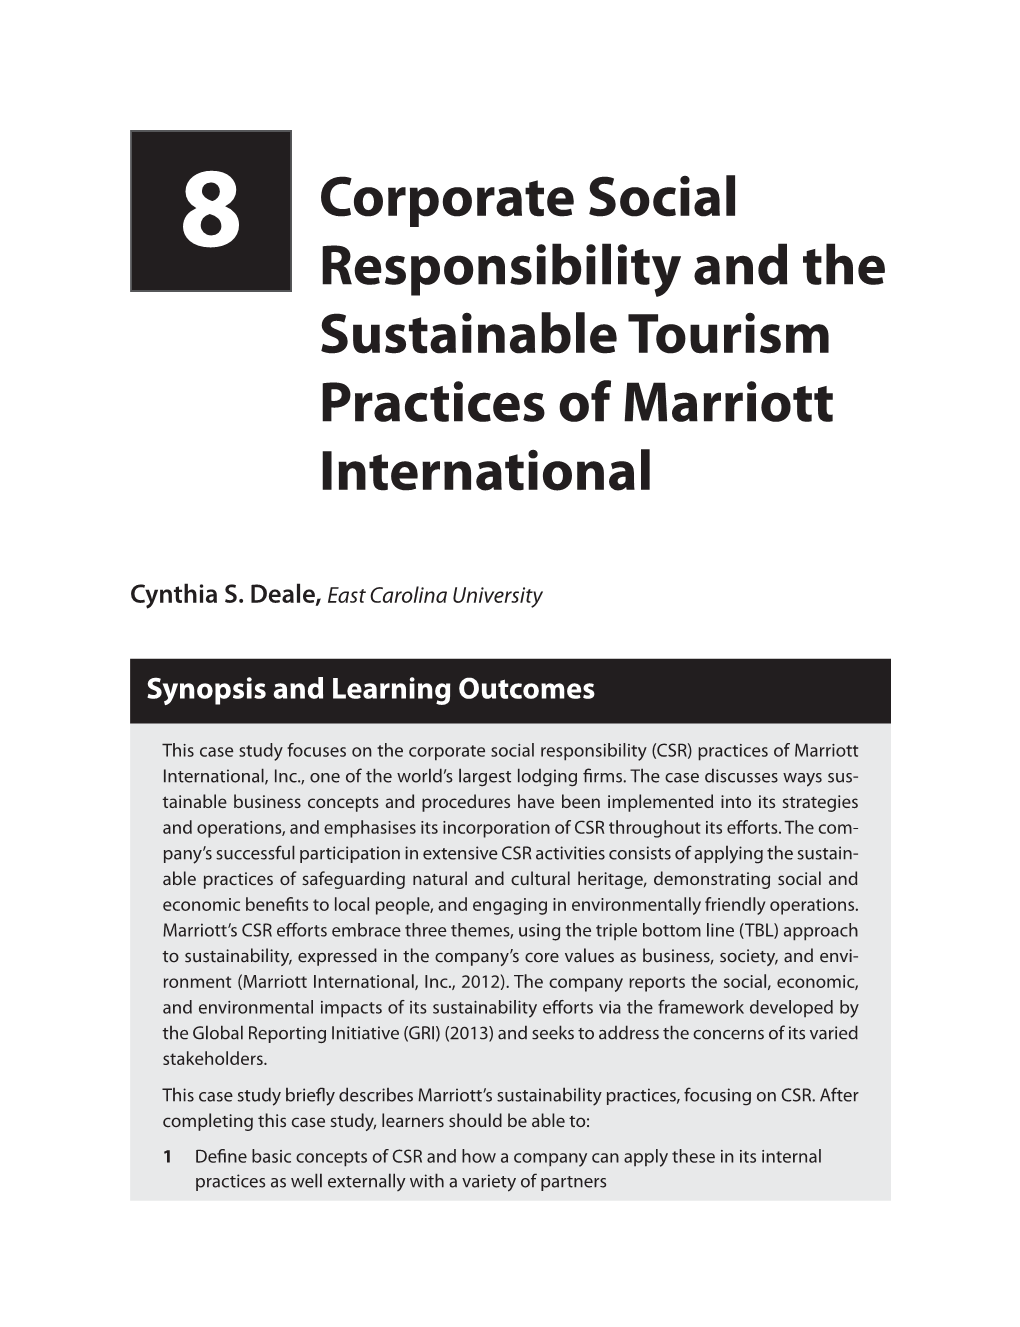 8 Corporate Social Responsibility and the Sustainable Tourism Practices